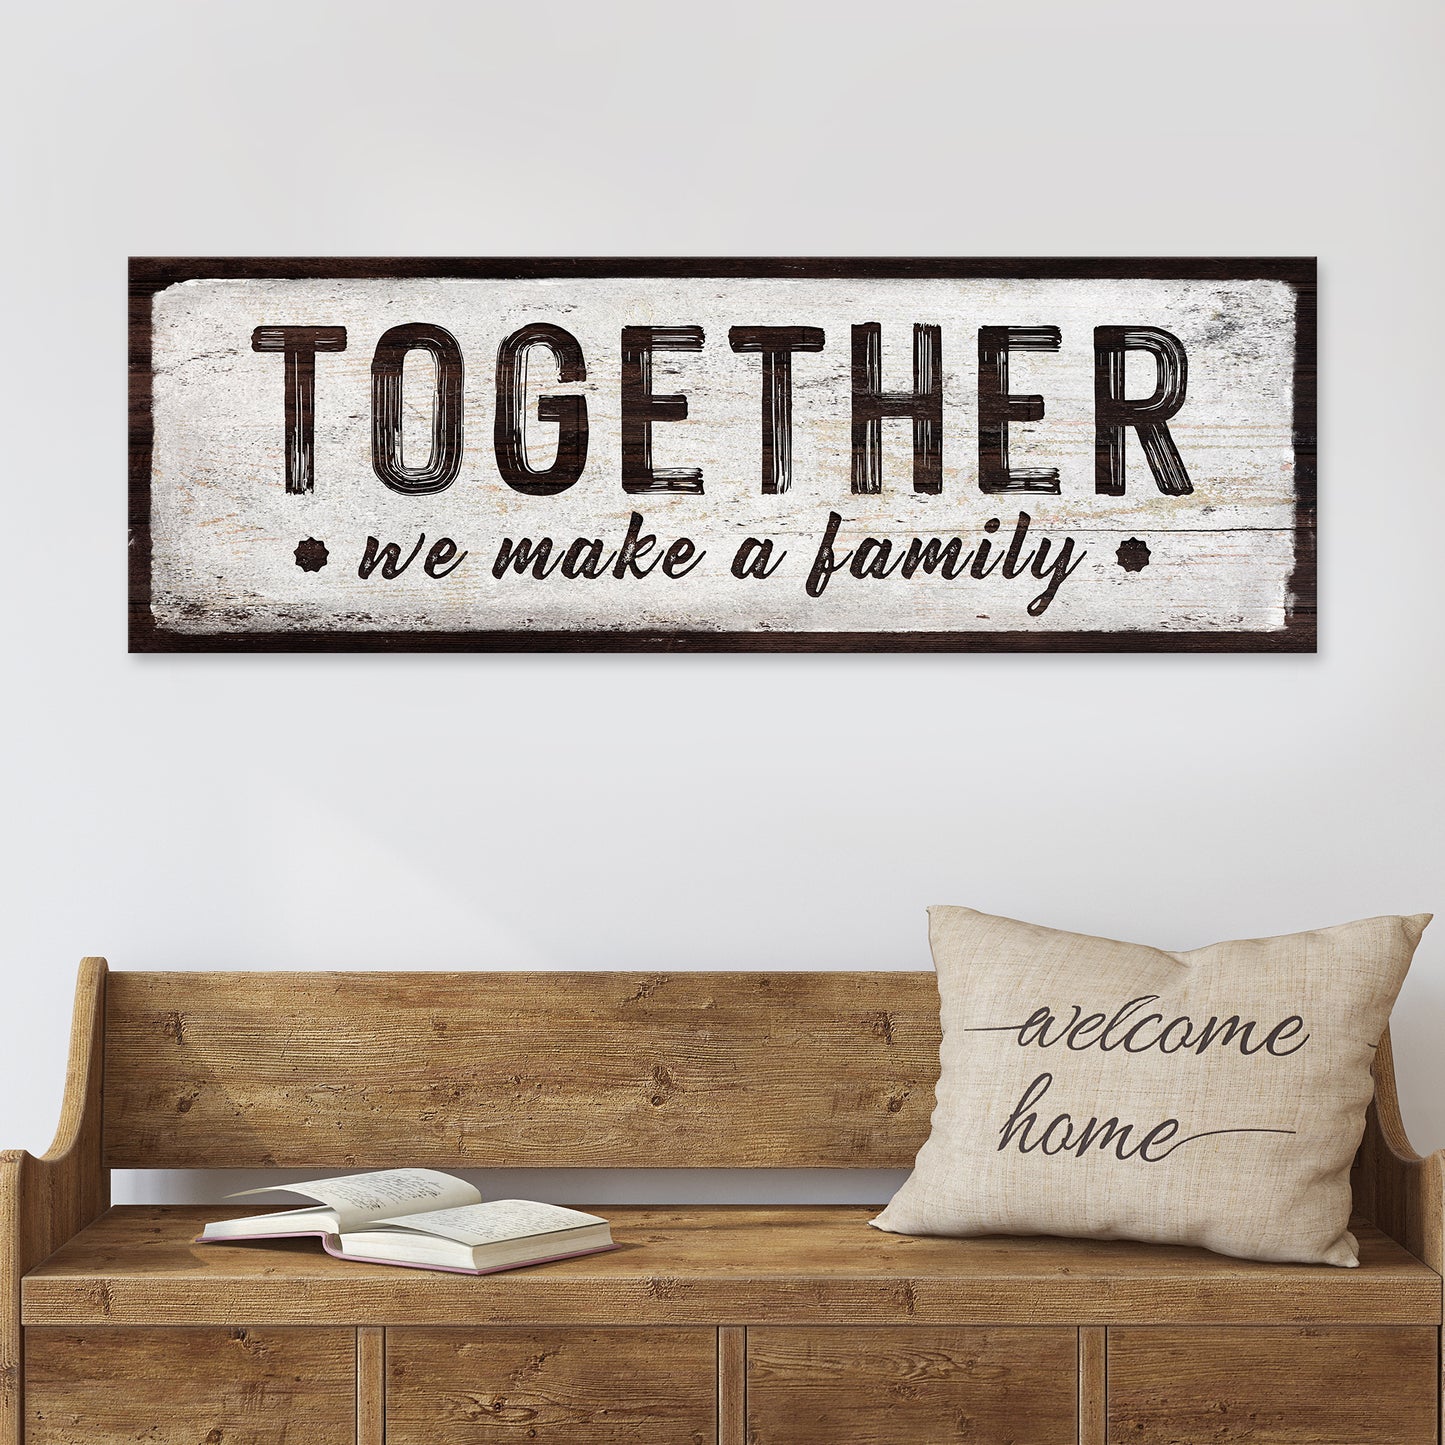 Together We Make A Family Sign III - Image by Tailored Canvases